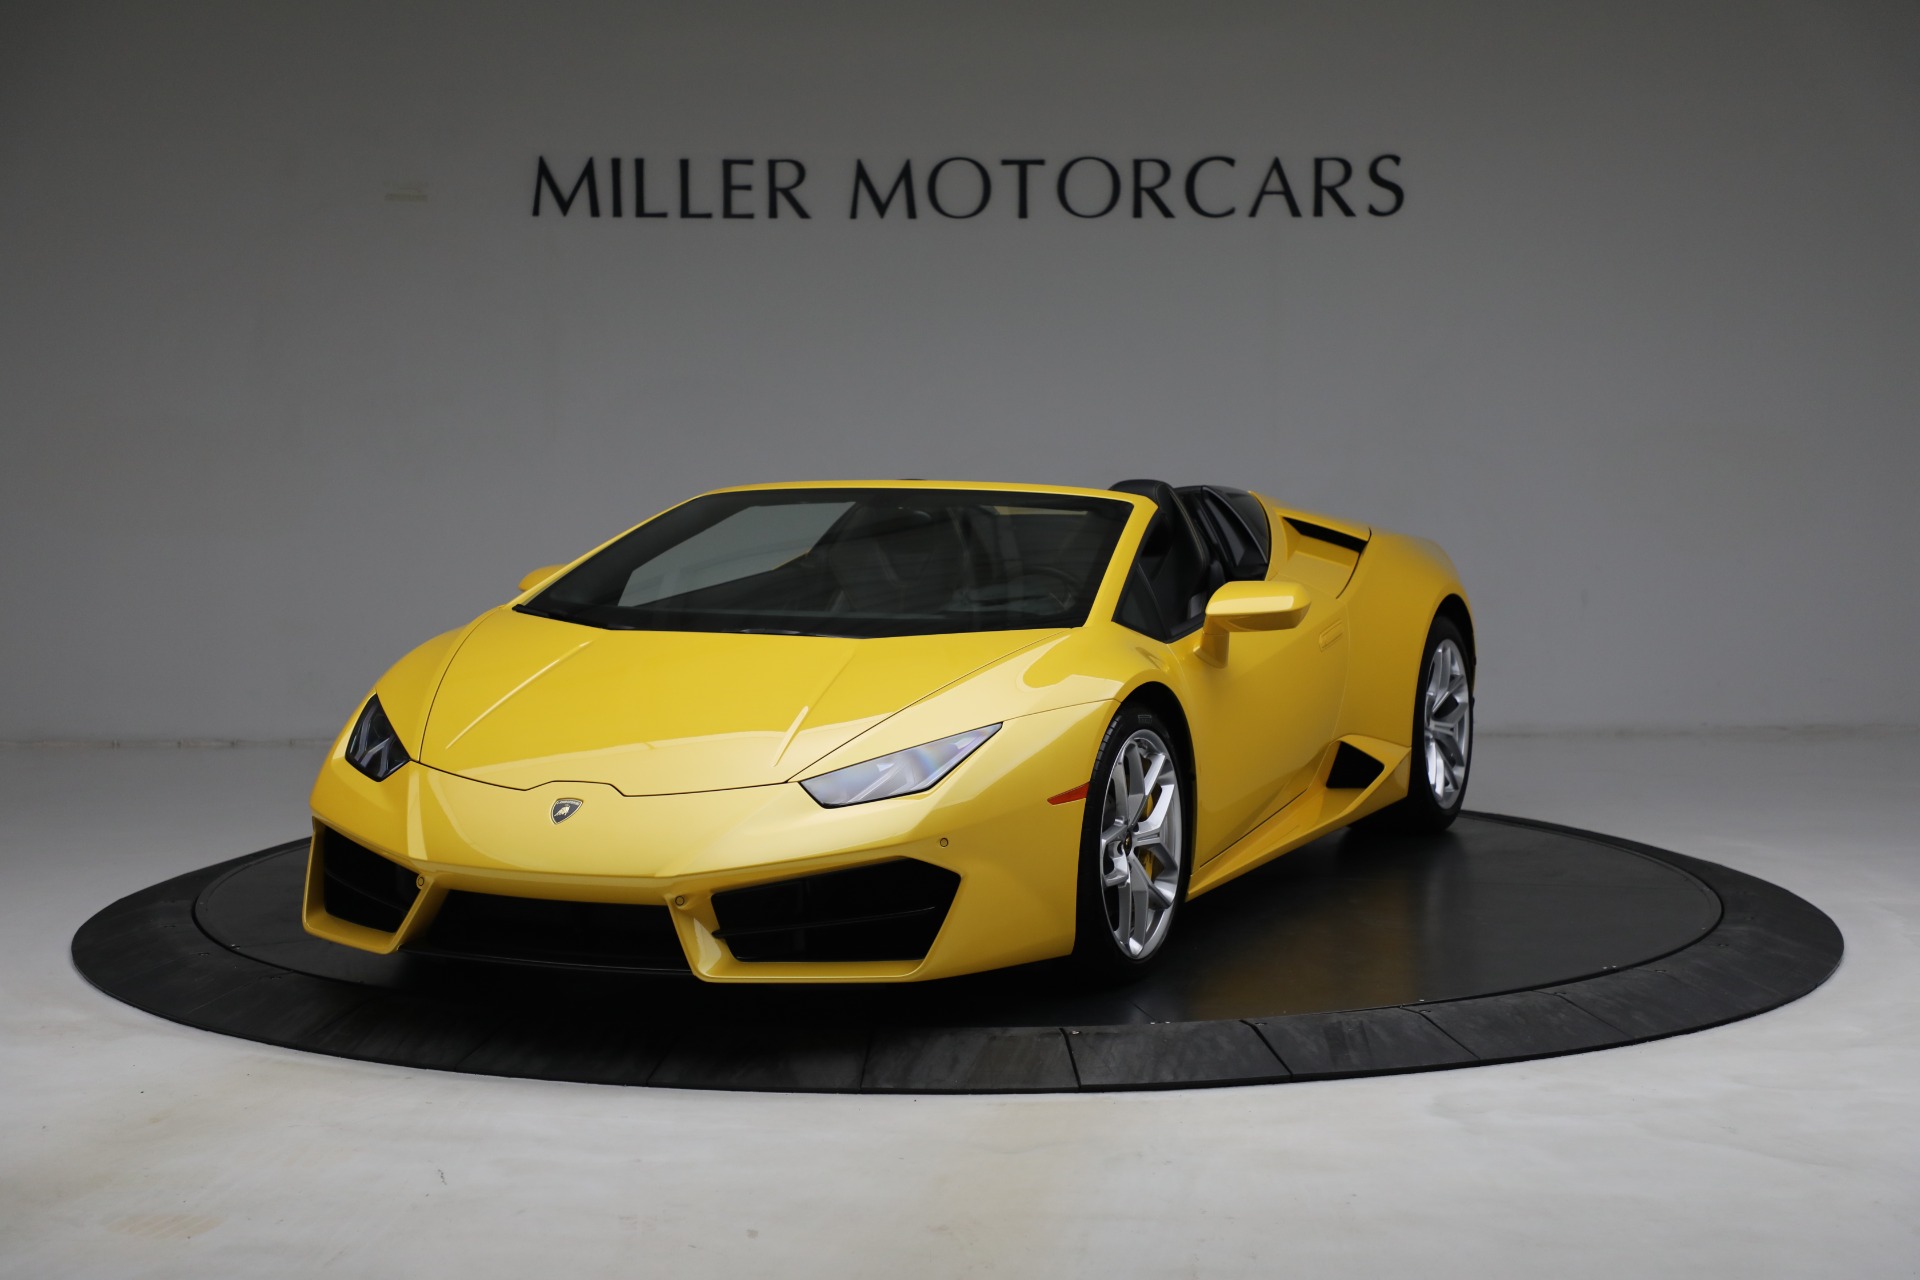 Used 2017 Lamborghini Huracan LP 580-2 Spyder for sale Sold at Maserati of Greenwich in Greenwich CT 06830 1